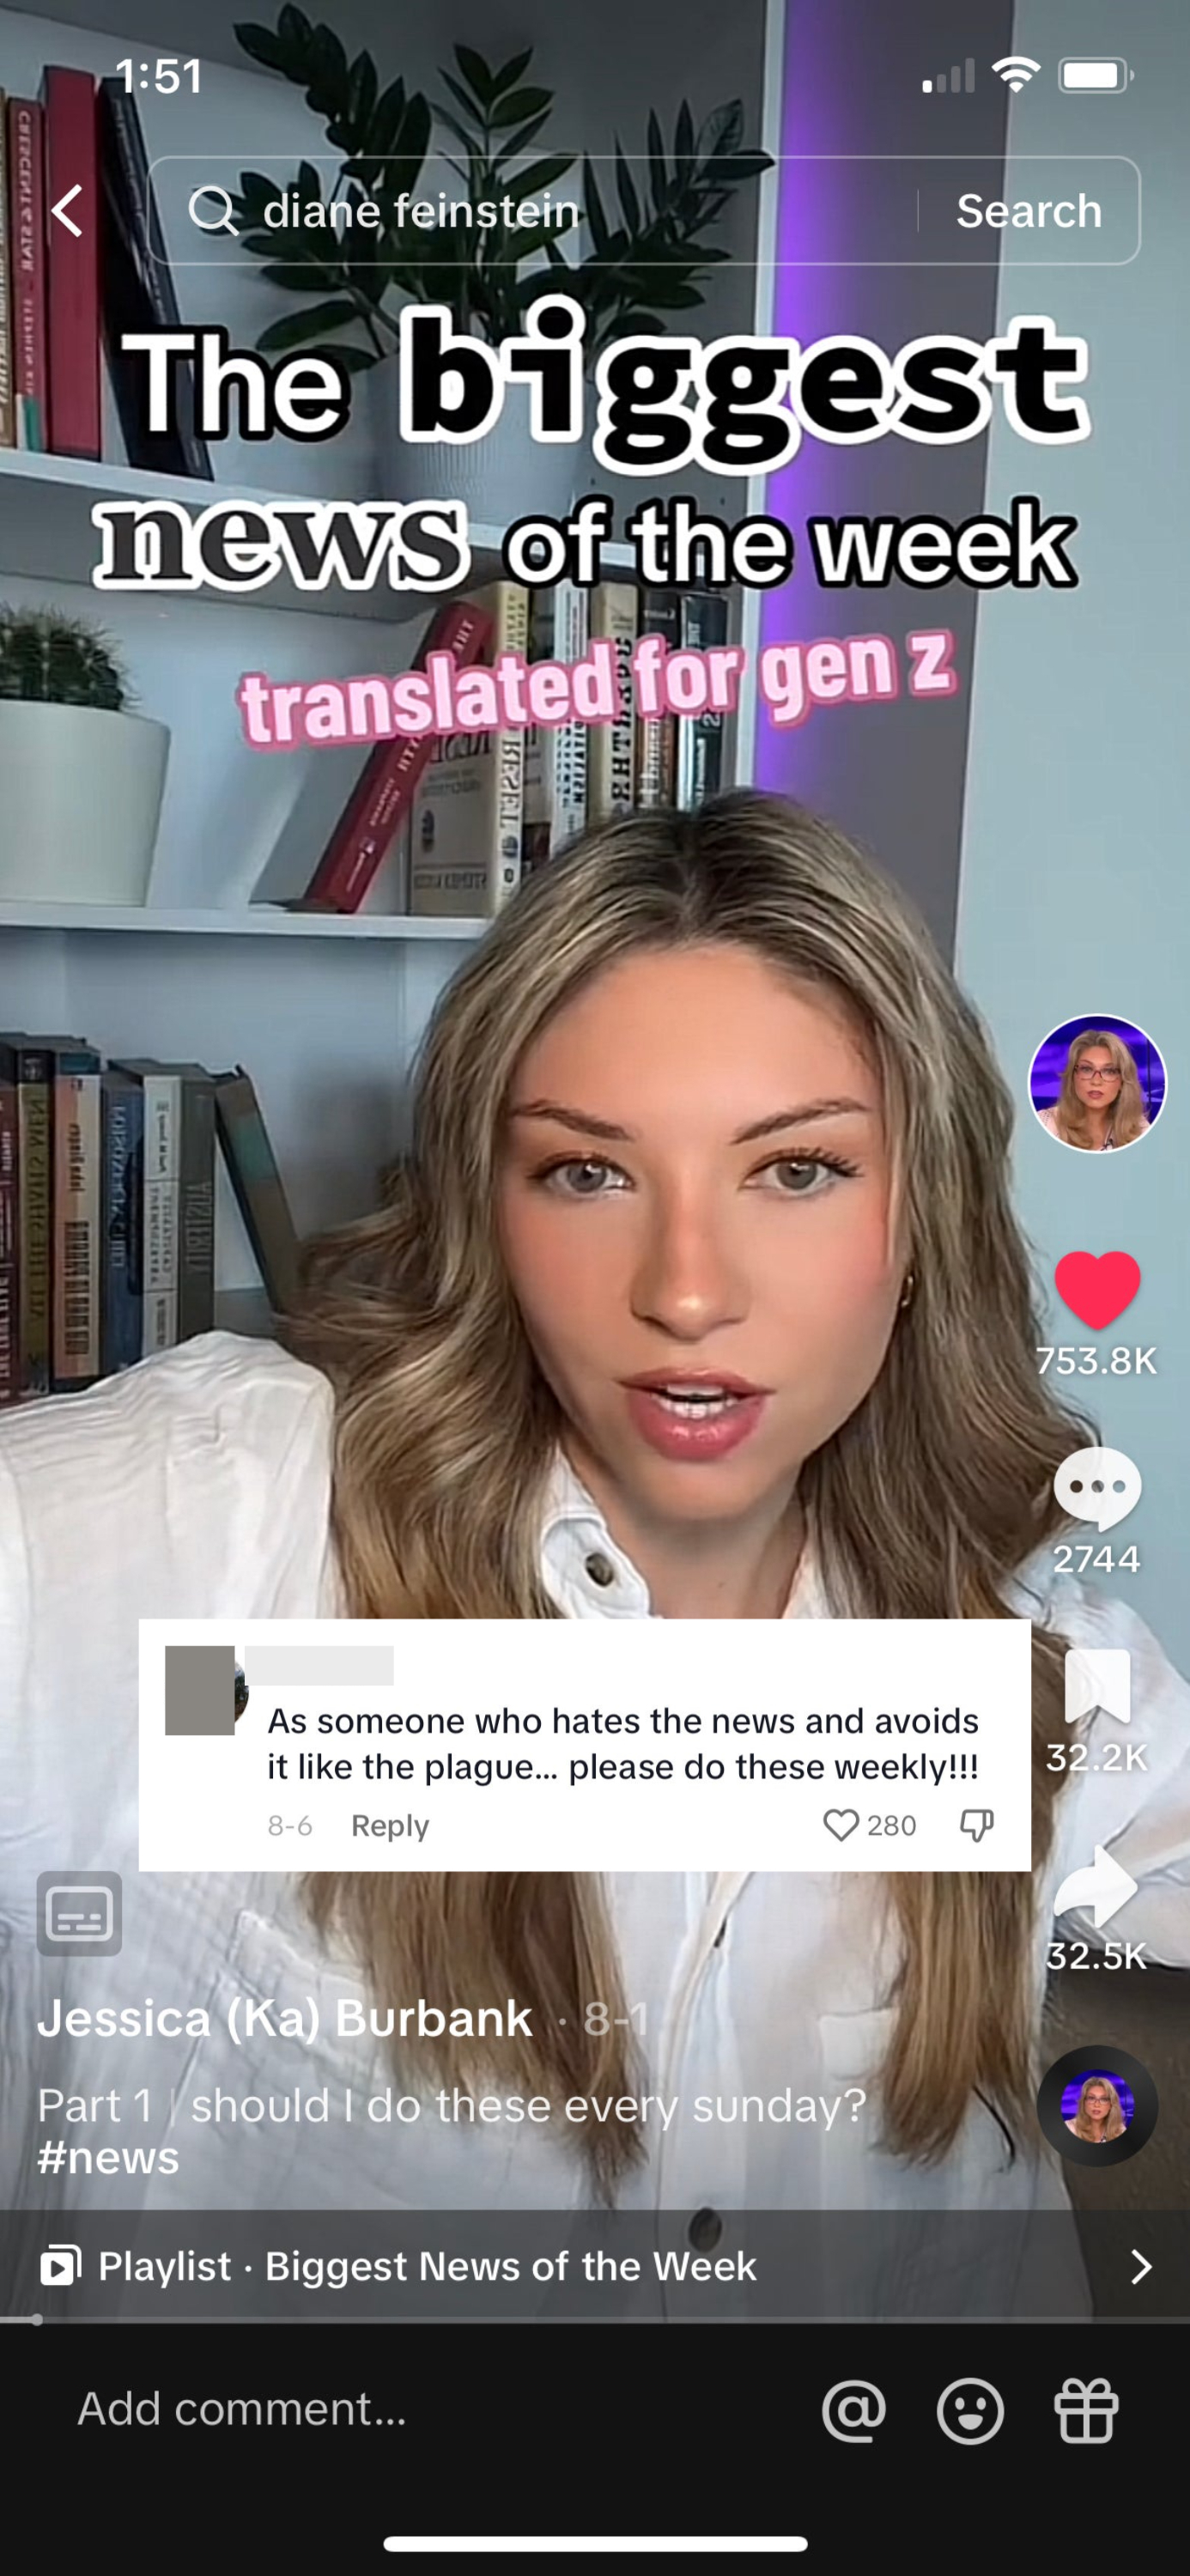 This Woman Translates The News For Gen Z, And It's Hilarious